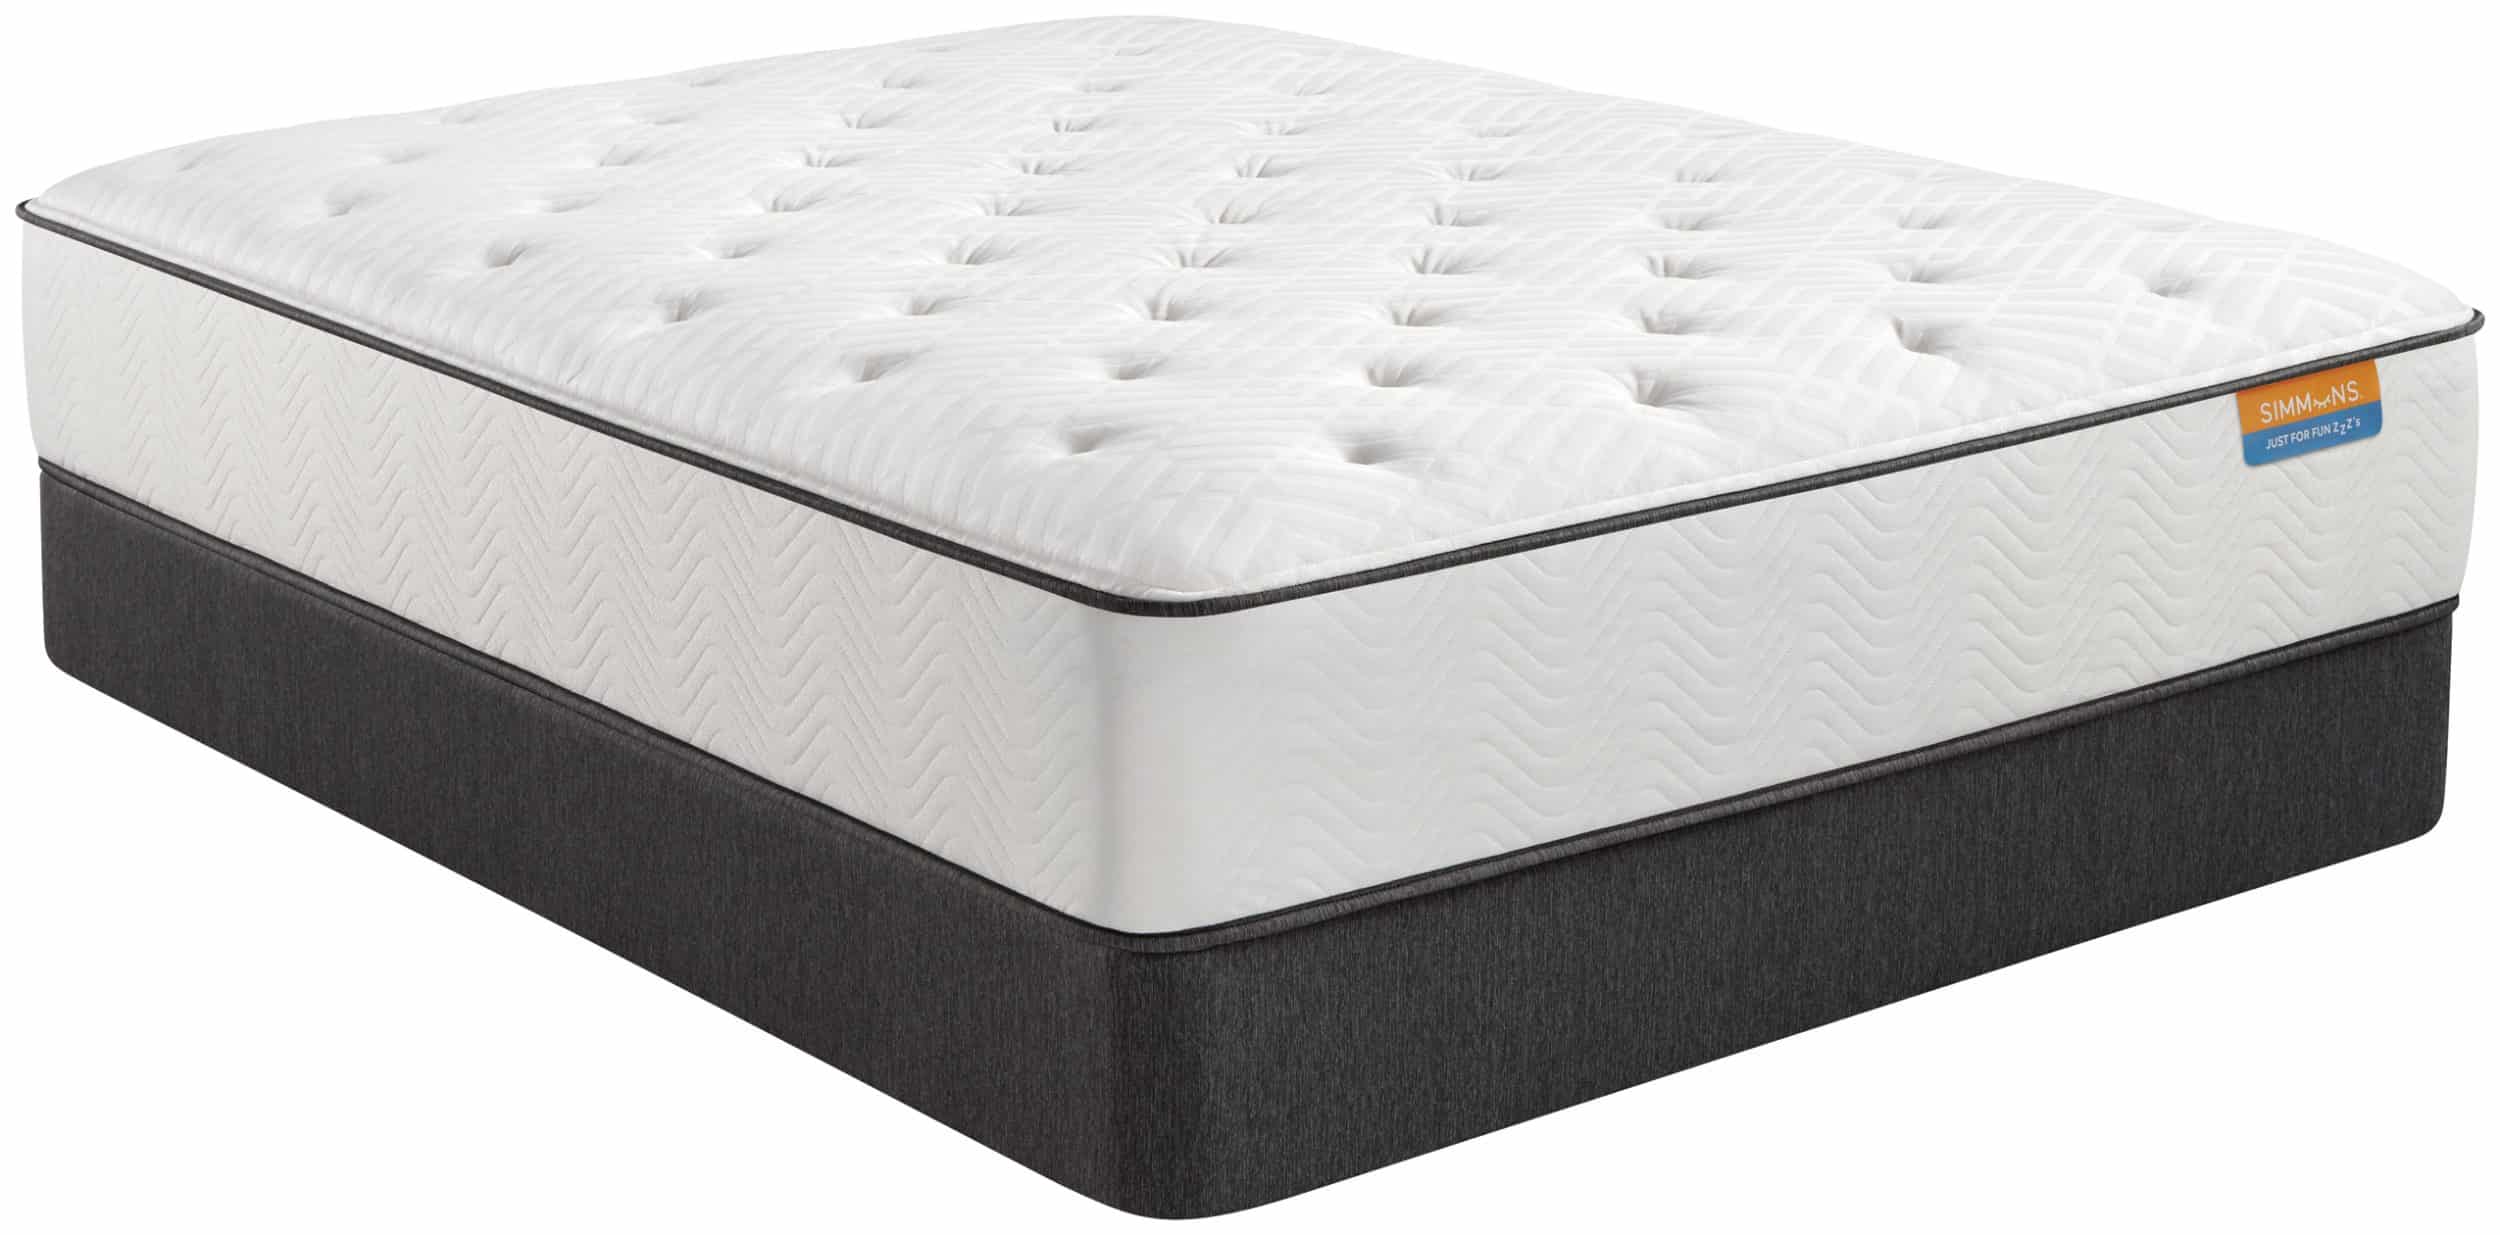 Side corner perspective of a white Simmons Vacay mattress